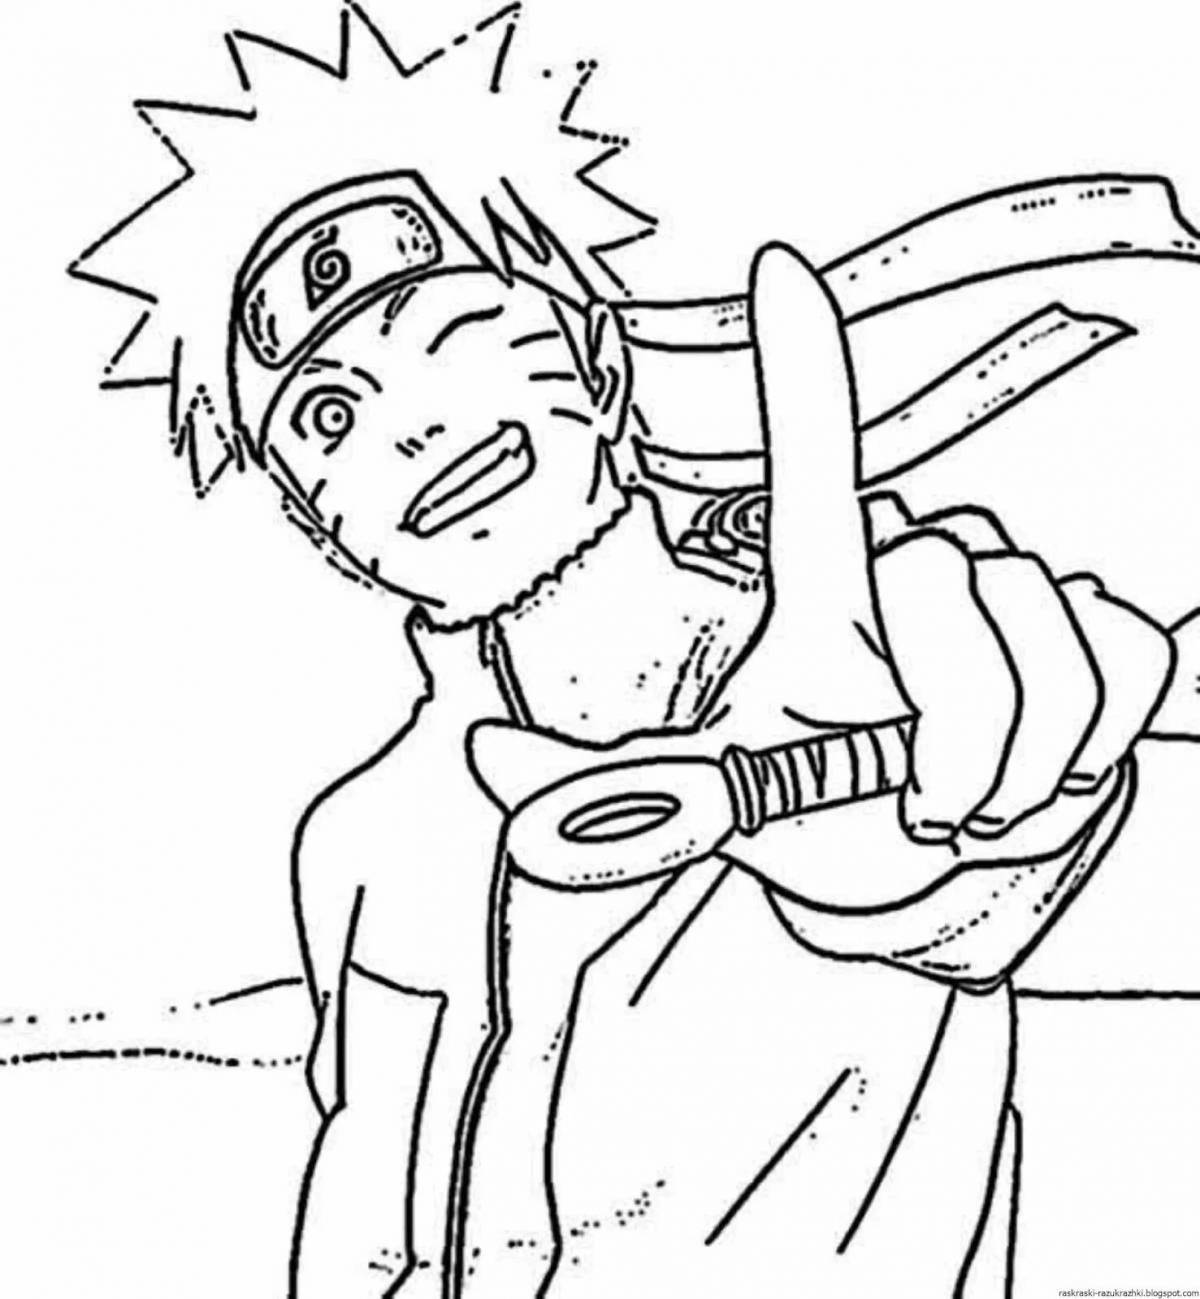 Intriguing naruto anime coloring page